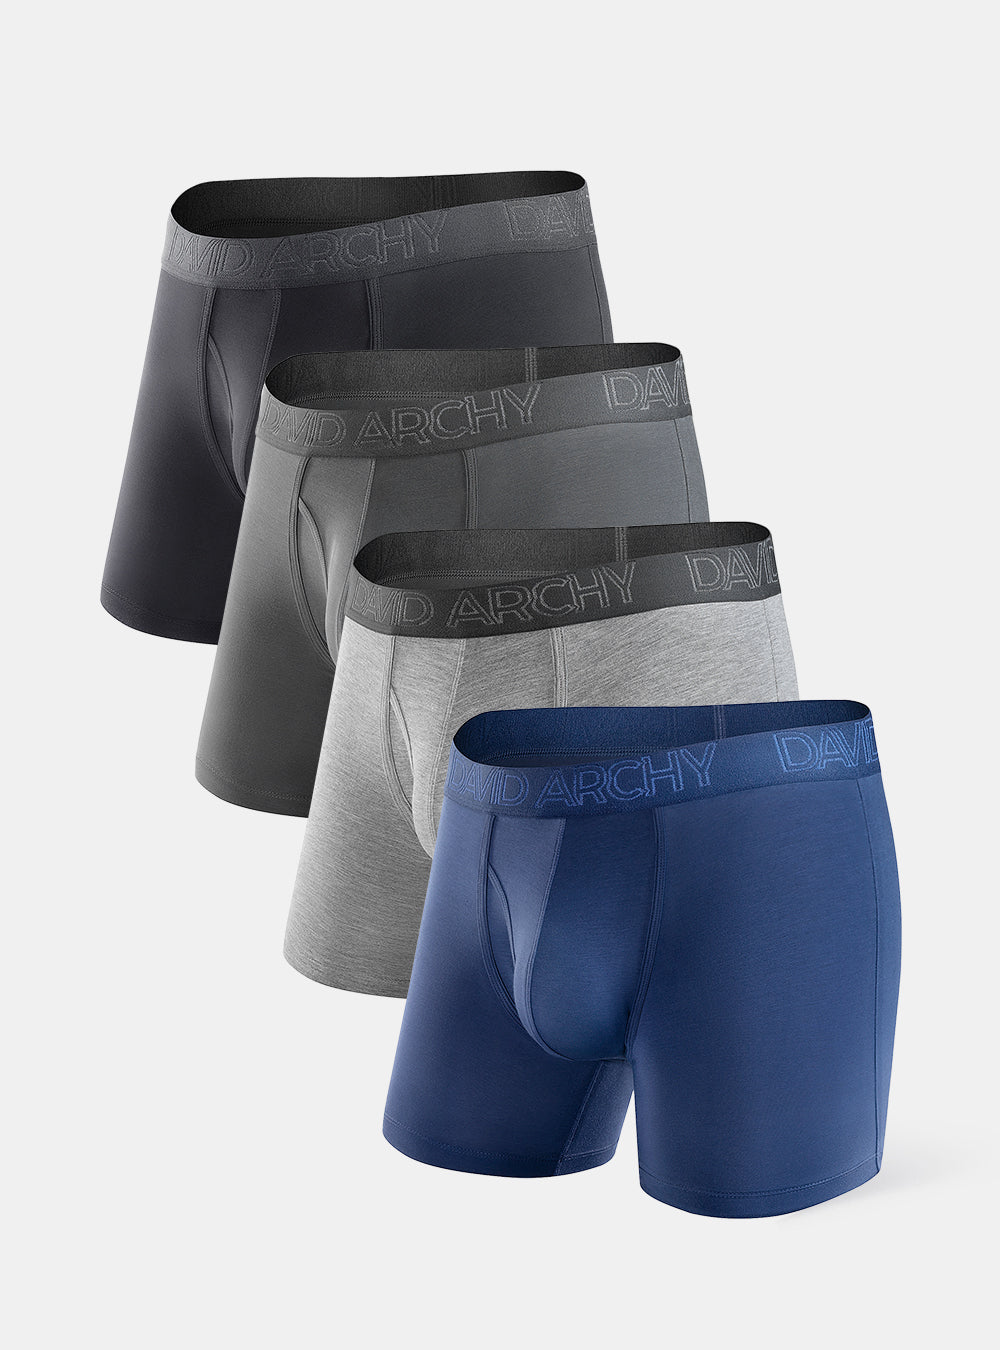 DAVID ARCHY Men's Dual Pouch Underwear Micro Modal Trunks Separate Pouches  with Fly 4 Pack, Black/Dark Gray/Navy Blue/Wine, Large : Buy Online at Best  Price in KSA - Souq is now 